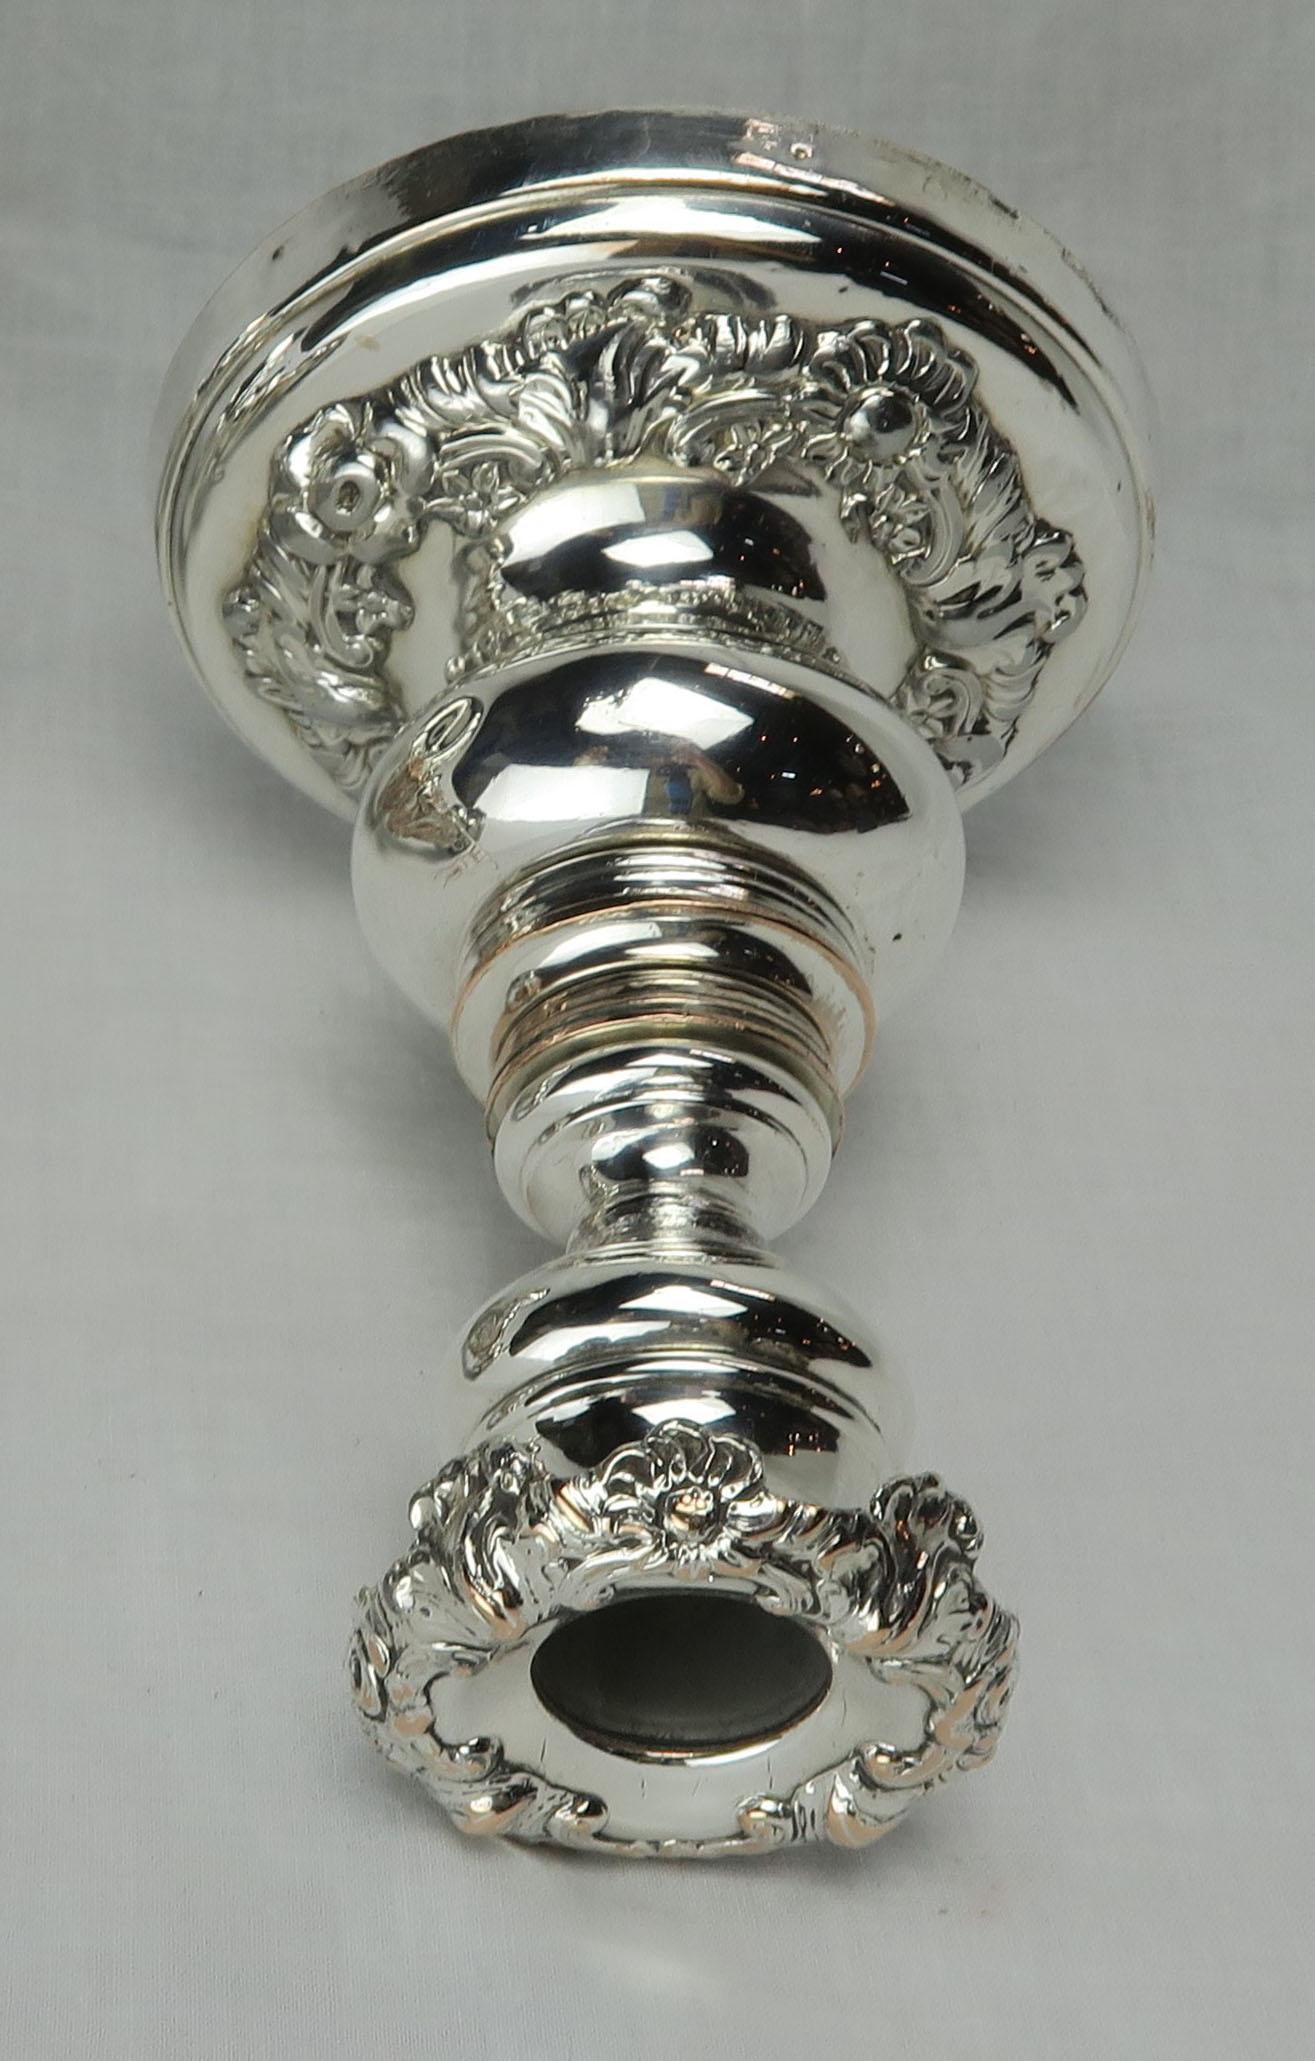 20th Century Pair of English Silver Repousse Candlesticks, circa 1900